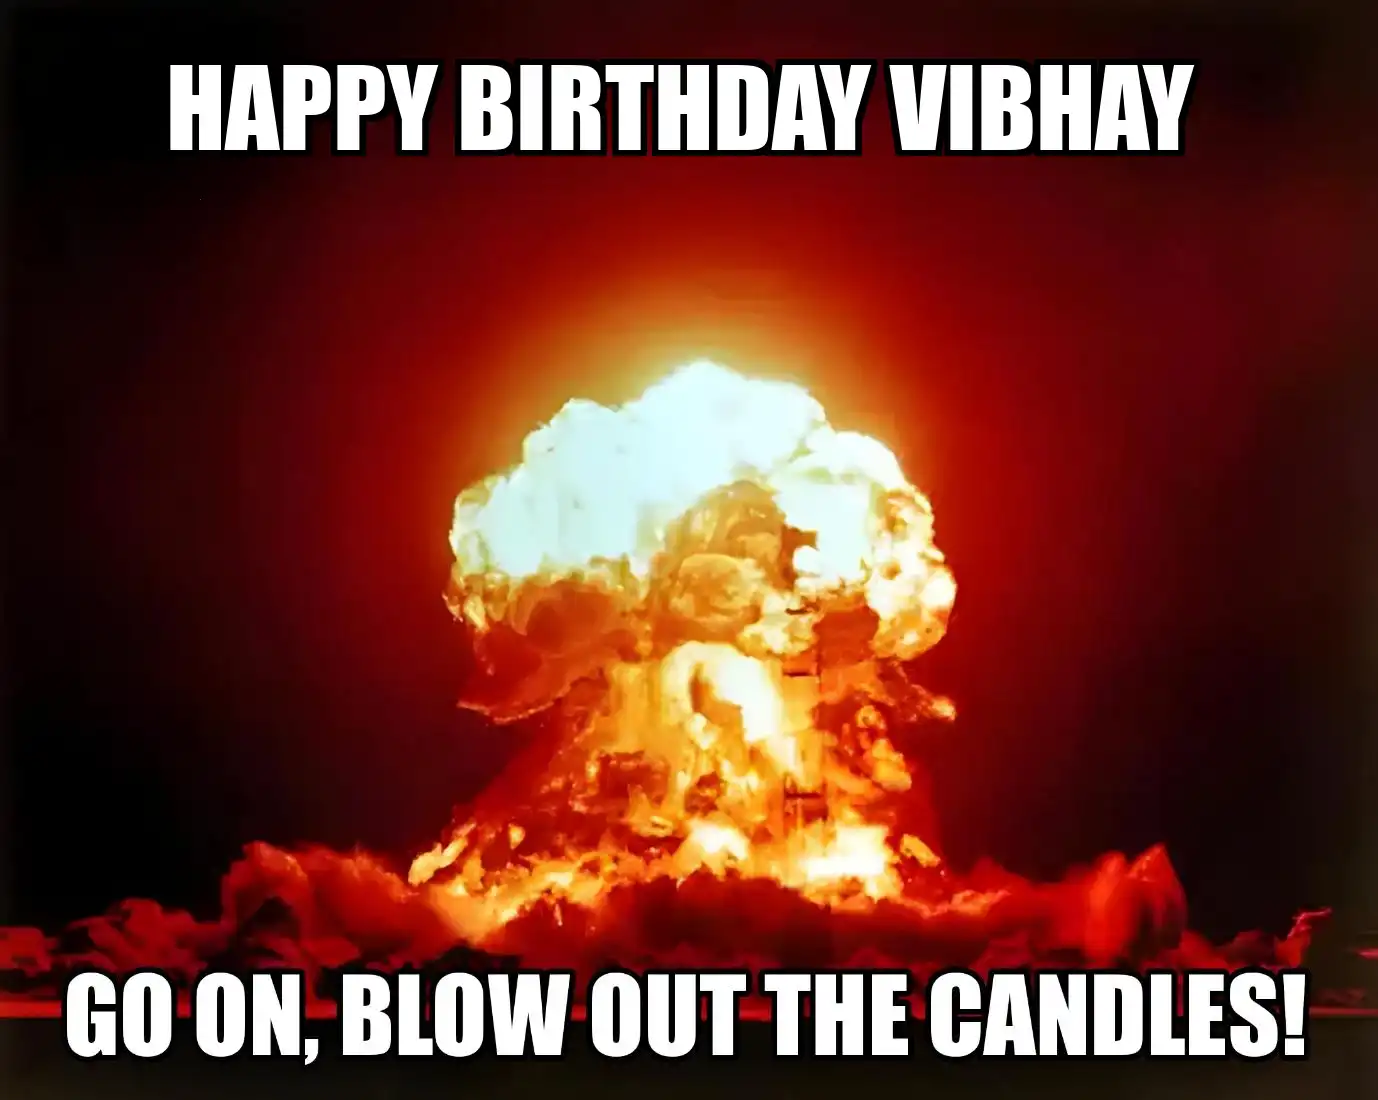 Happy Birthday Vibhay Go On Blow Out The Candles Meme